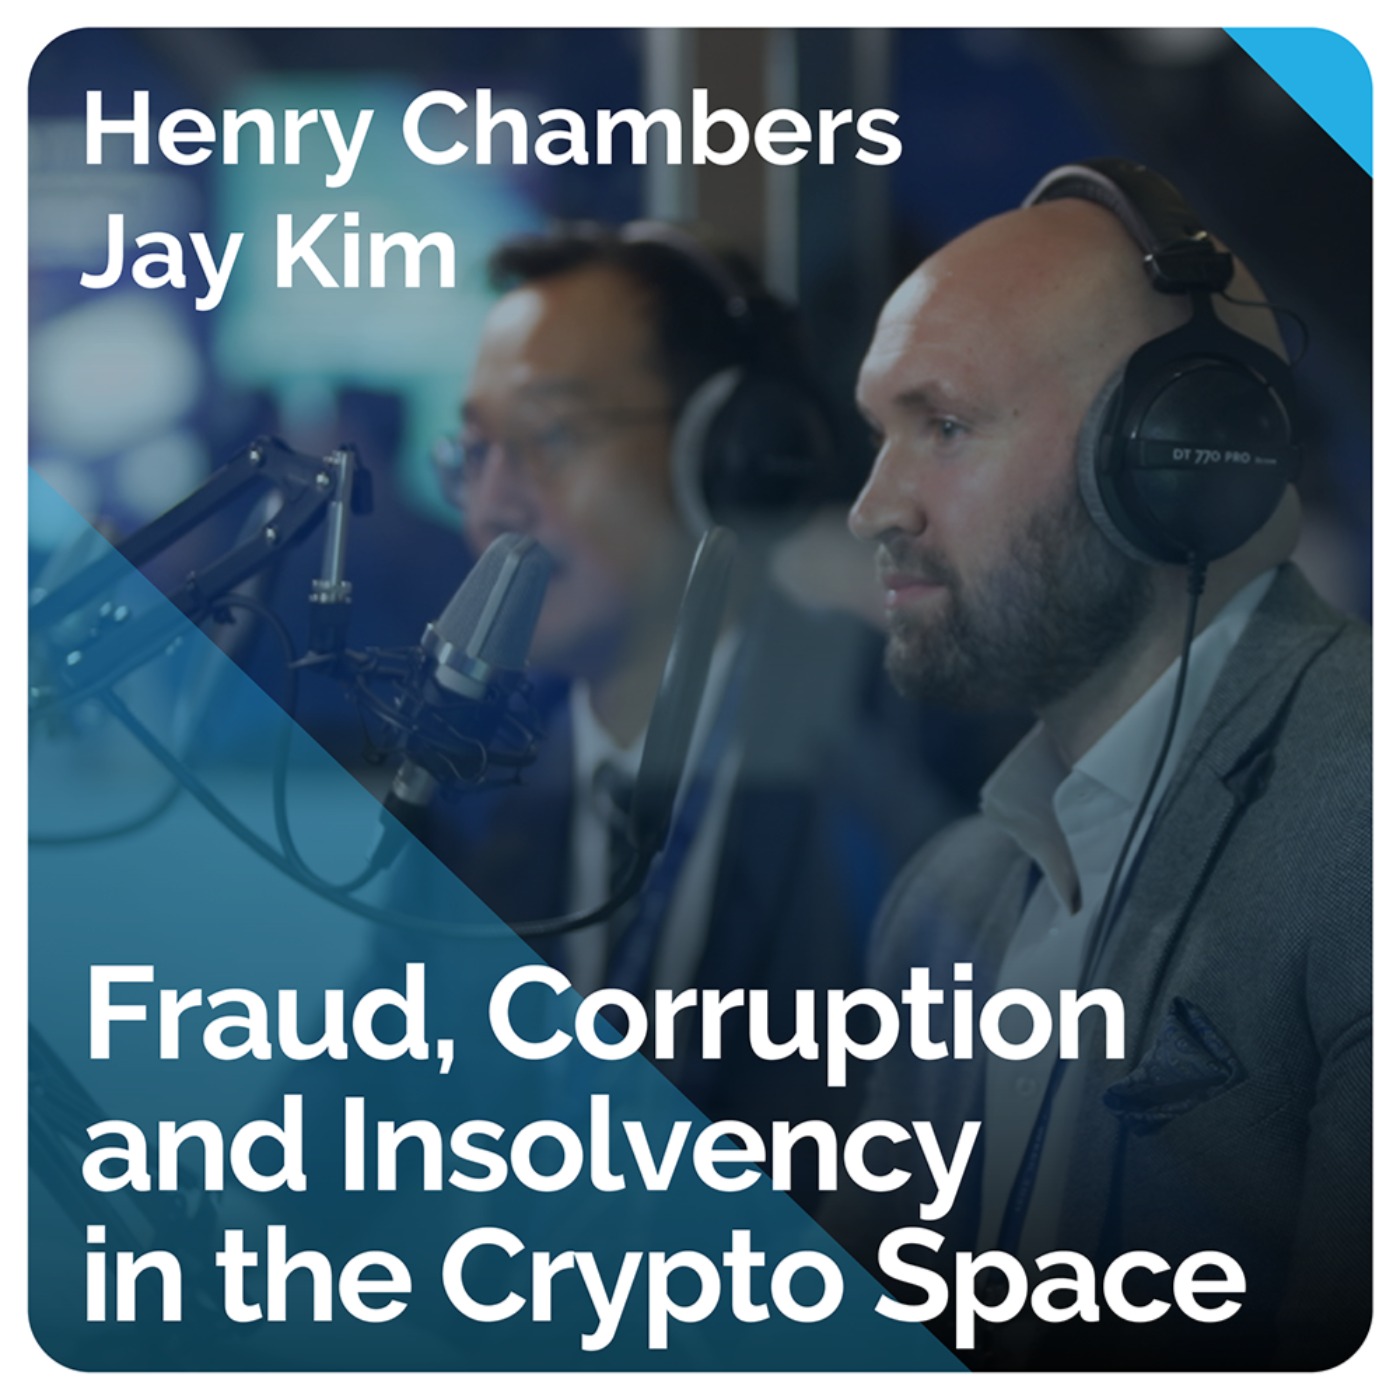 Fraud, Corruption and Insolvency in the Crypto Space (ft. Henry Chambers and Jay Kim)